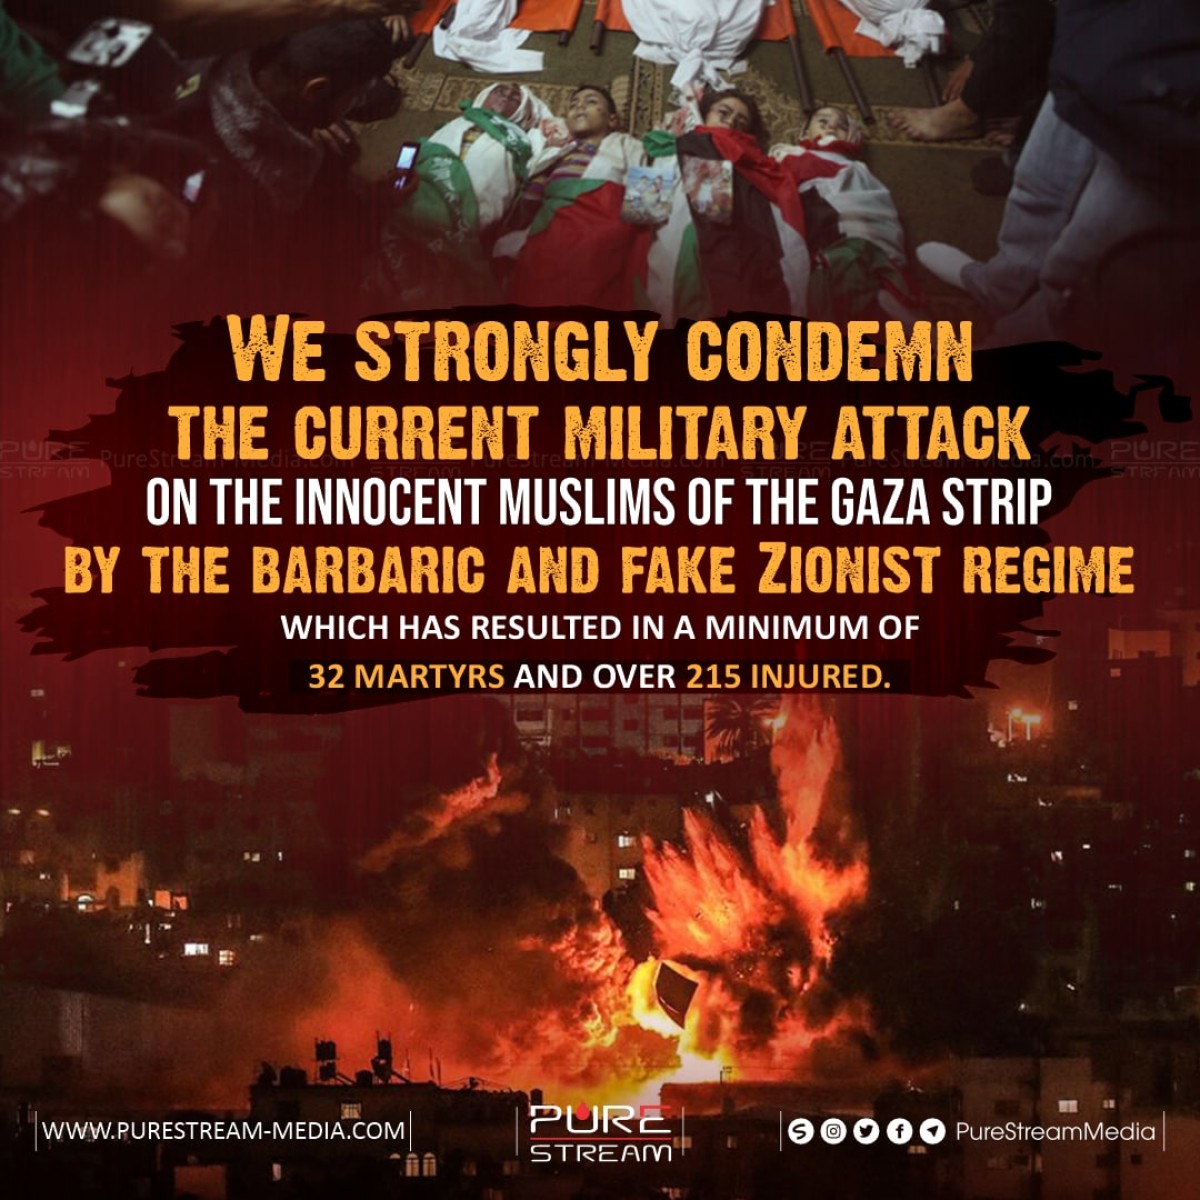 We strongly condemn the current military attack on the innocent Muslims of the Gaza Strip by the barbaric